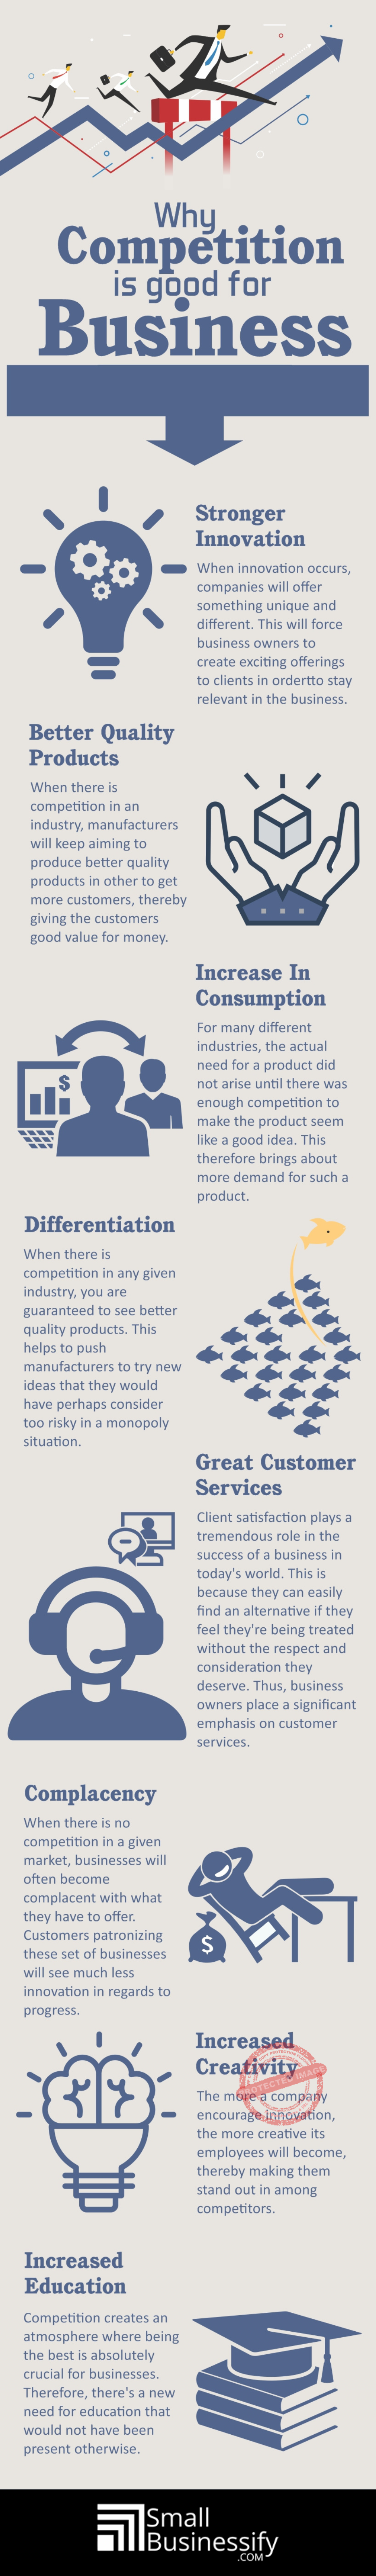 Why Competition is Good for Business infographic